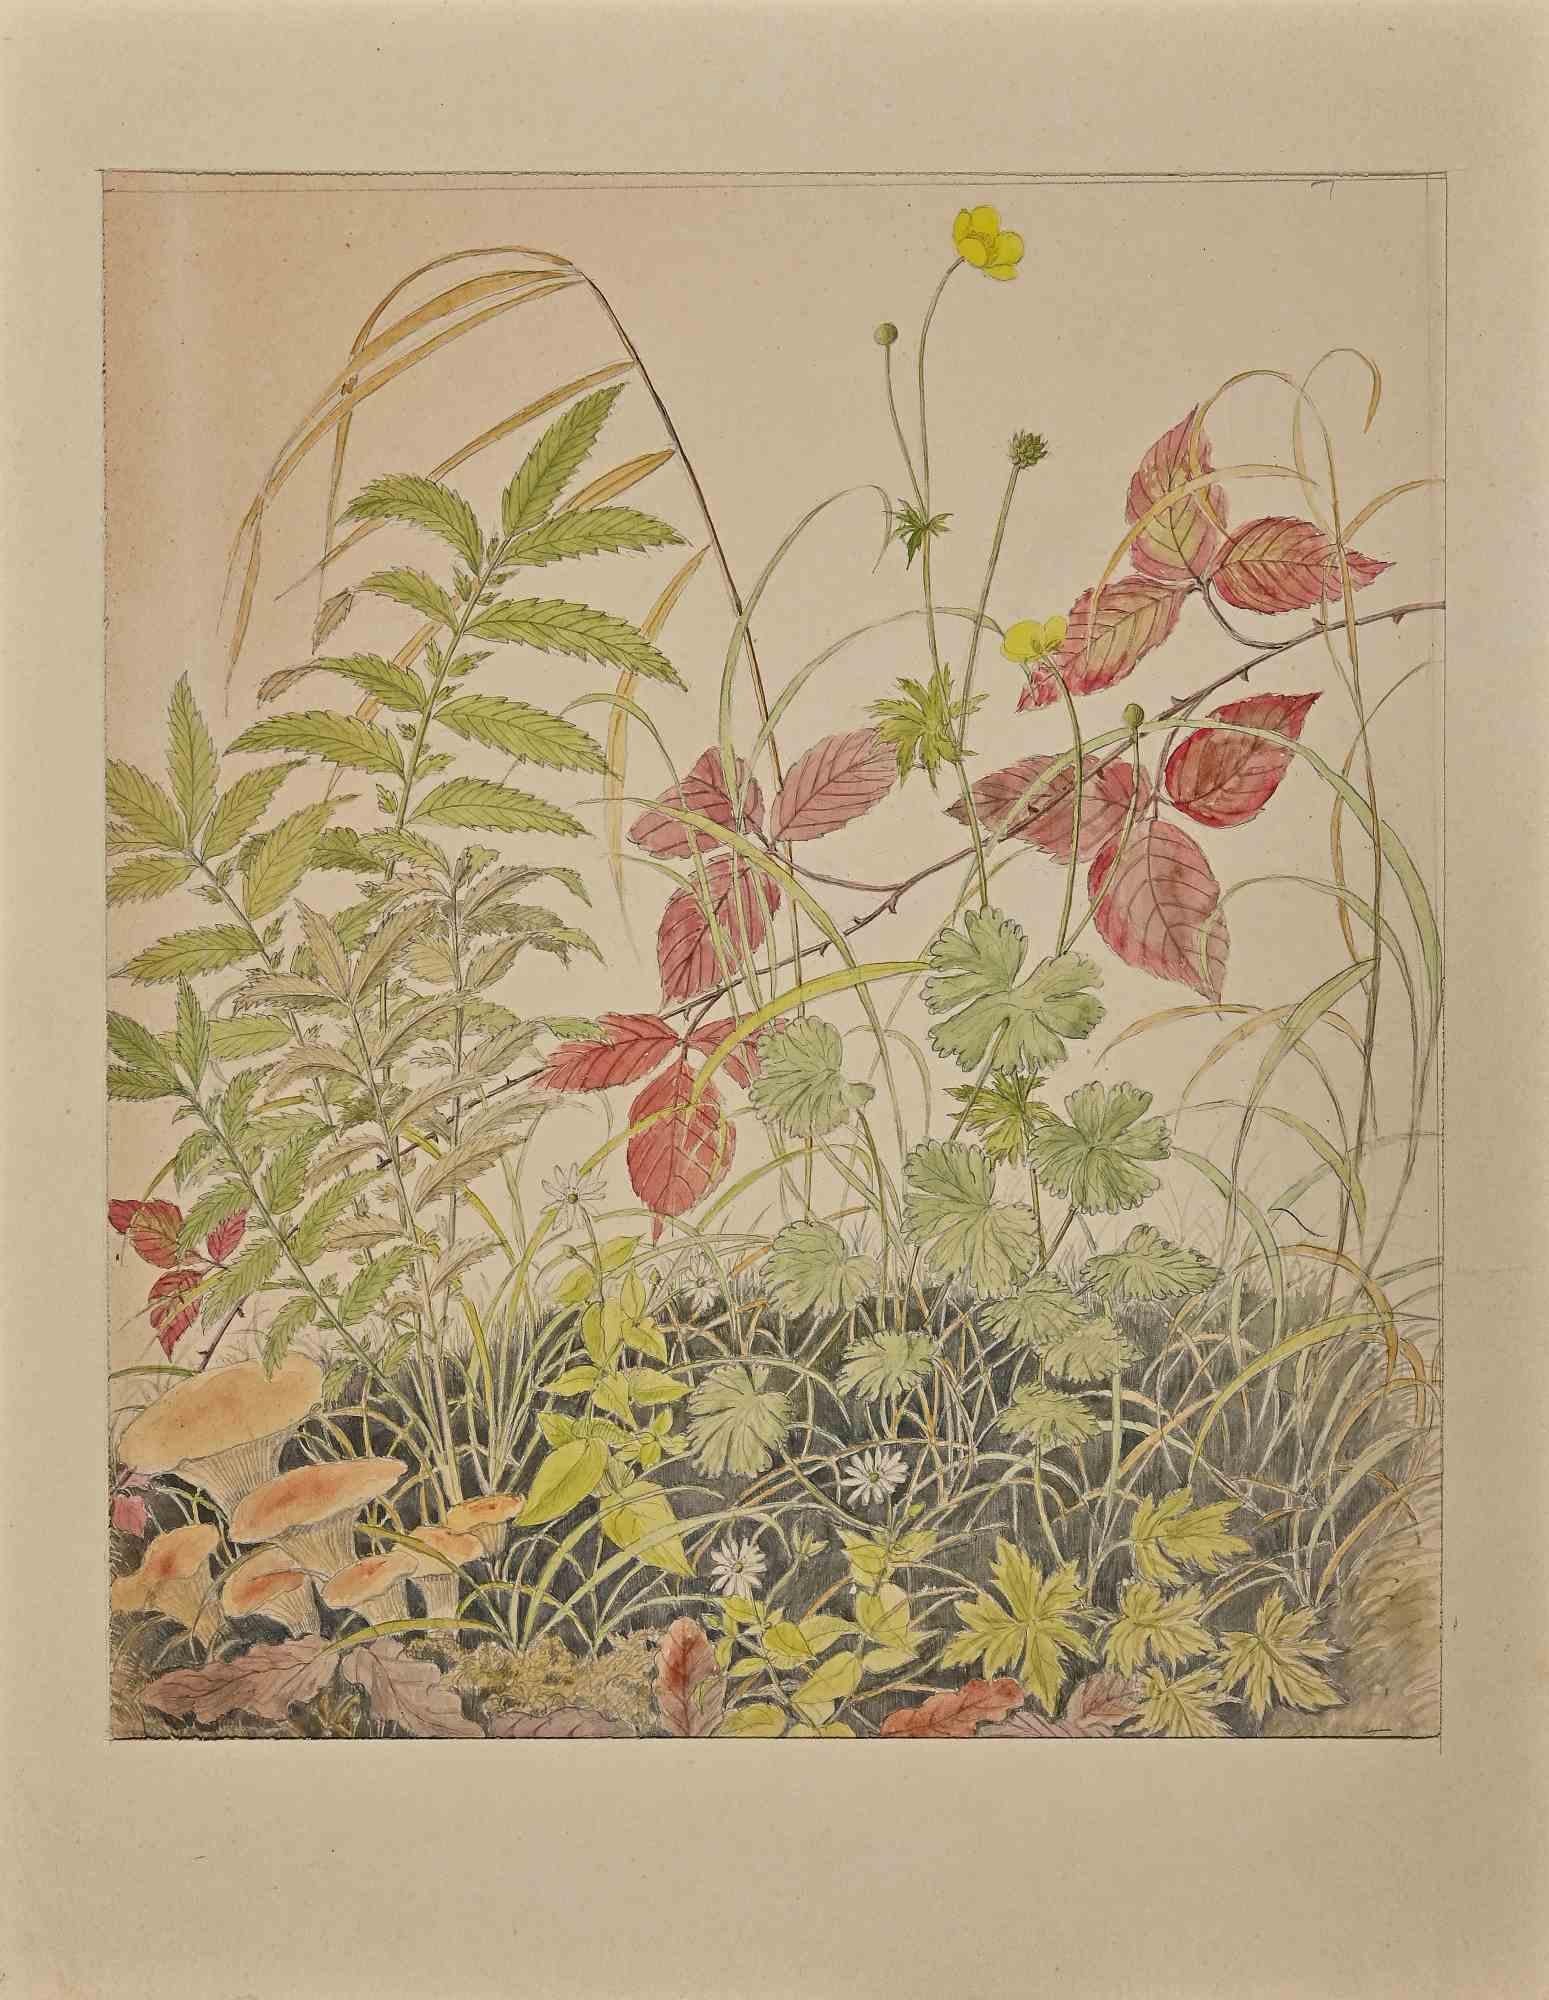 Flowers, Plants and Mushrooms - Drawing by A. G.Krohn-Mid 20th century